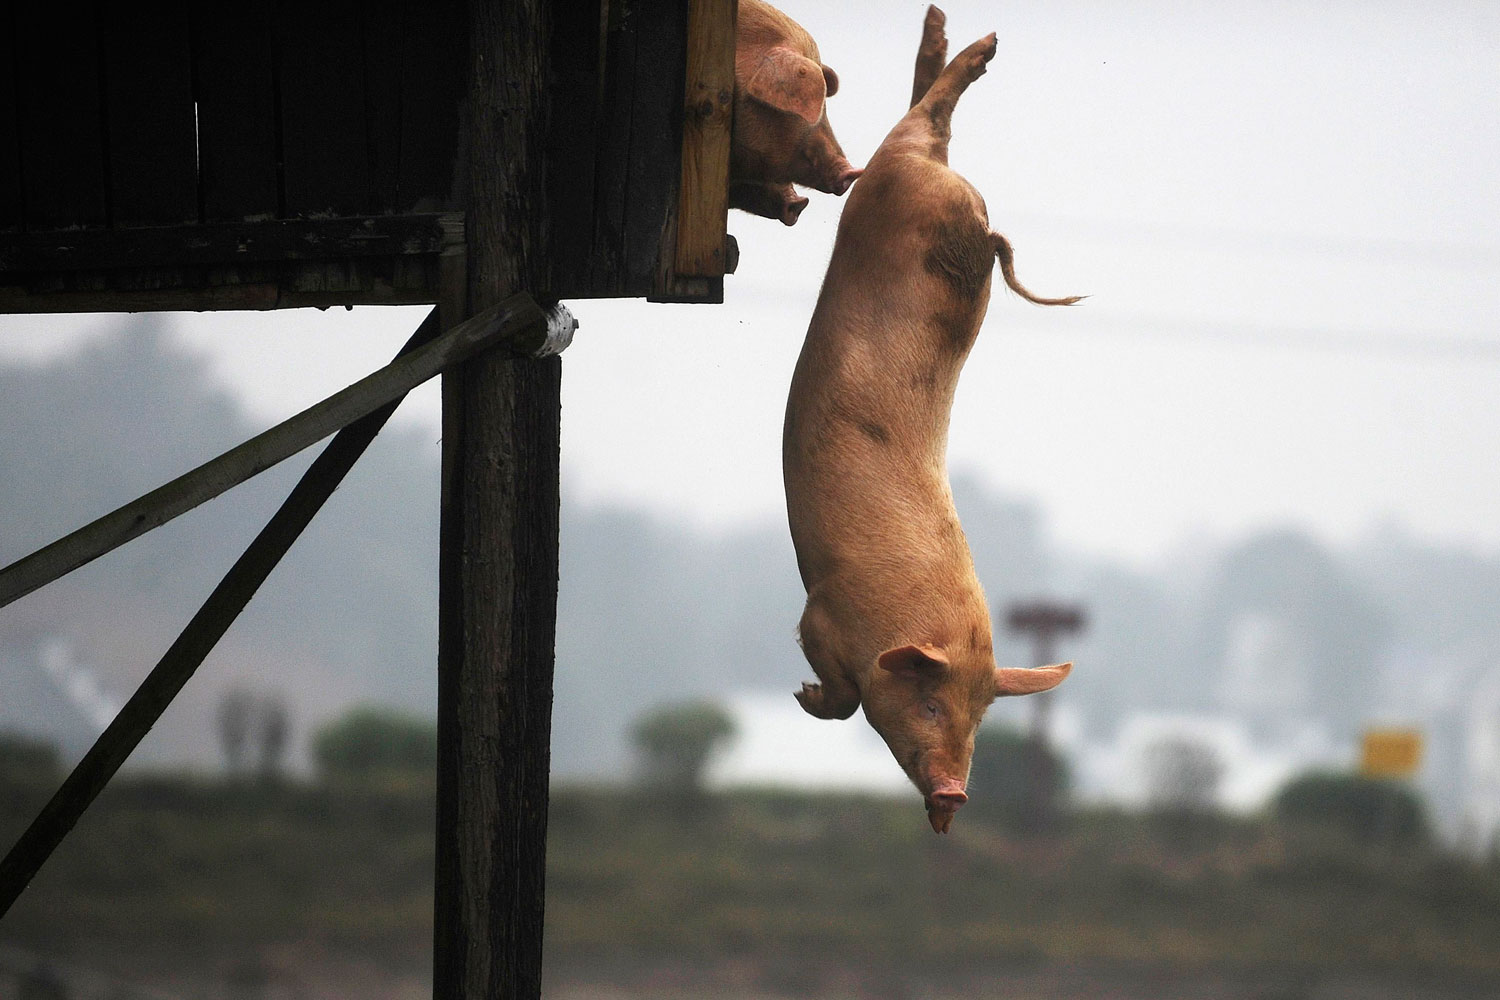 Image: Nov. 15, 2012. A pig dives into the water in Ningxiang county, Hunan province, China. Villager Huang Demin drives his pigs to dive into the water from a 3-metre-high platform at least once a day, believing that the diving exercises would improve the quality and taste of the meat.